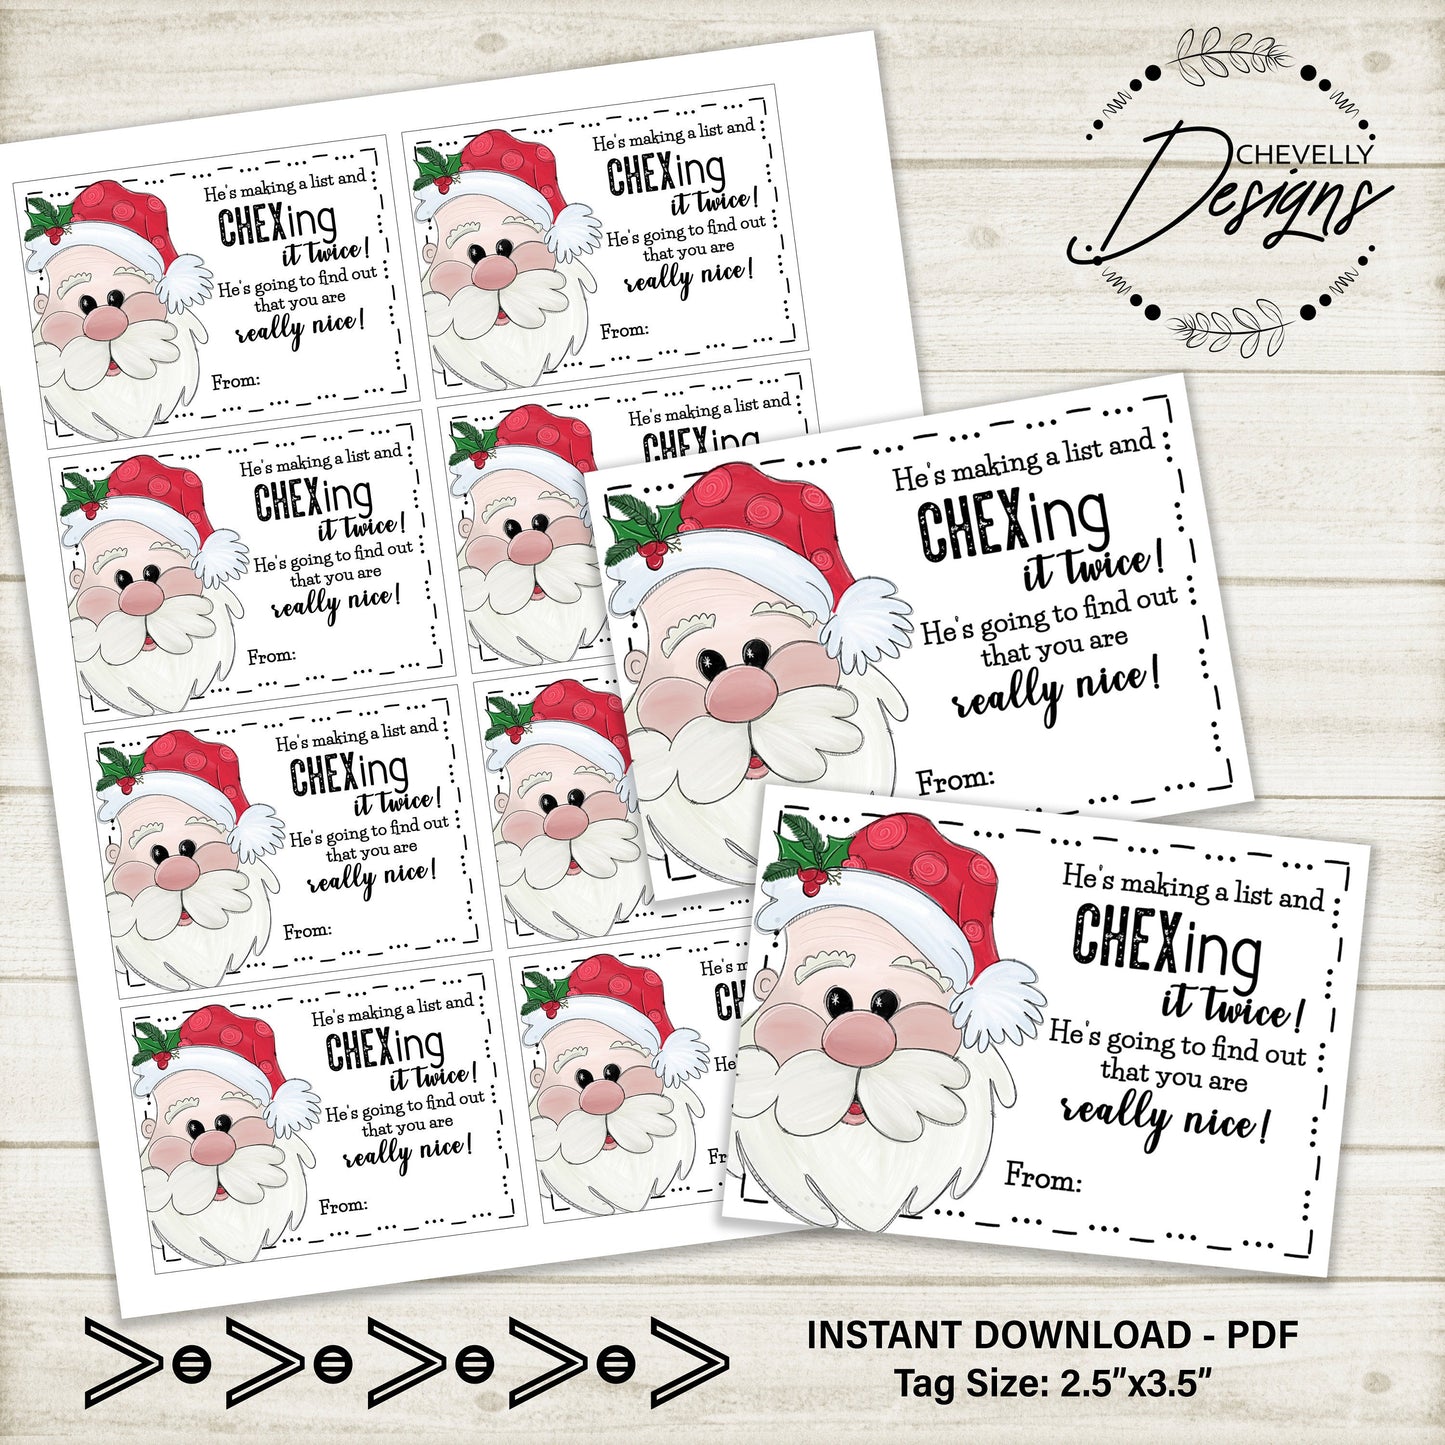 Printable - He's Making a List and CHEXing it Twice - Santa Gift Tags for Chex Mix >>>Instant Digital Download<<<